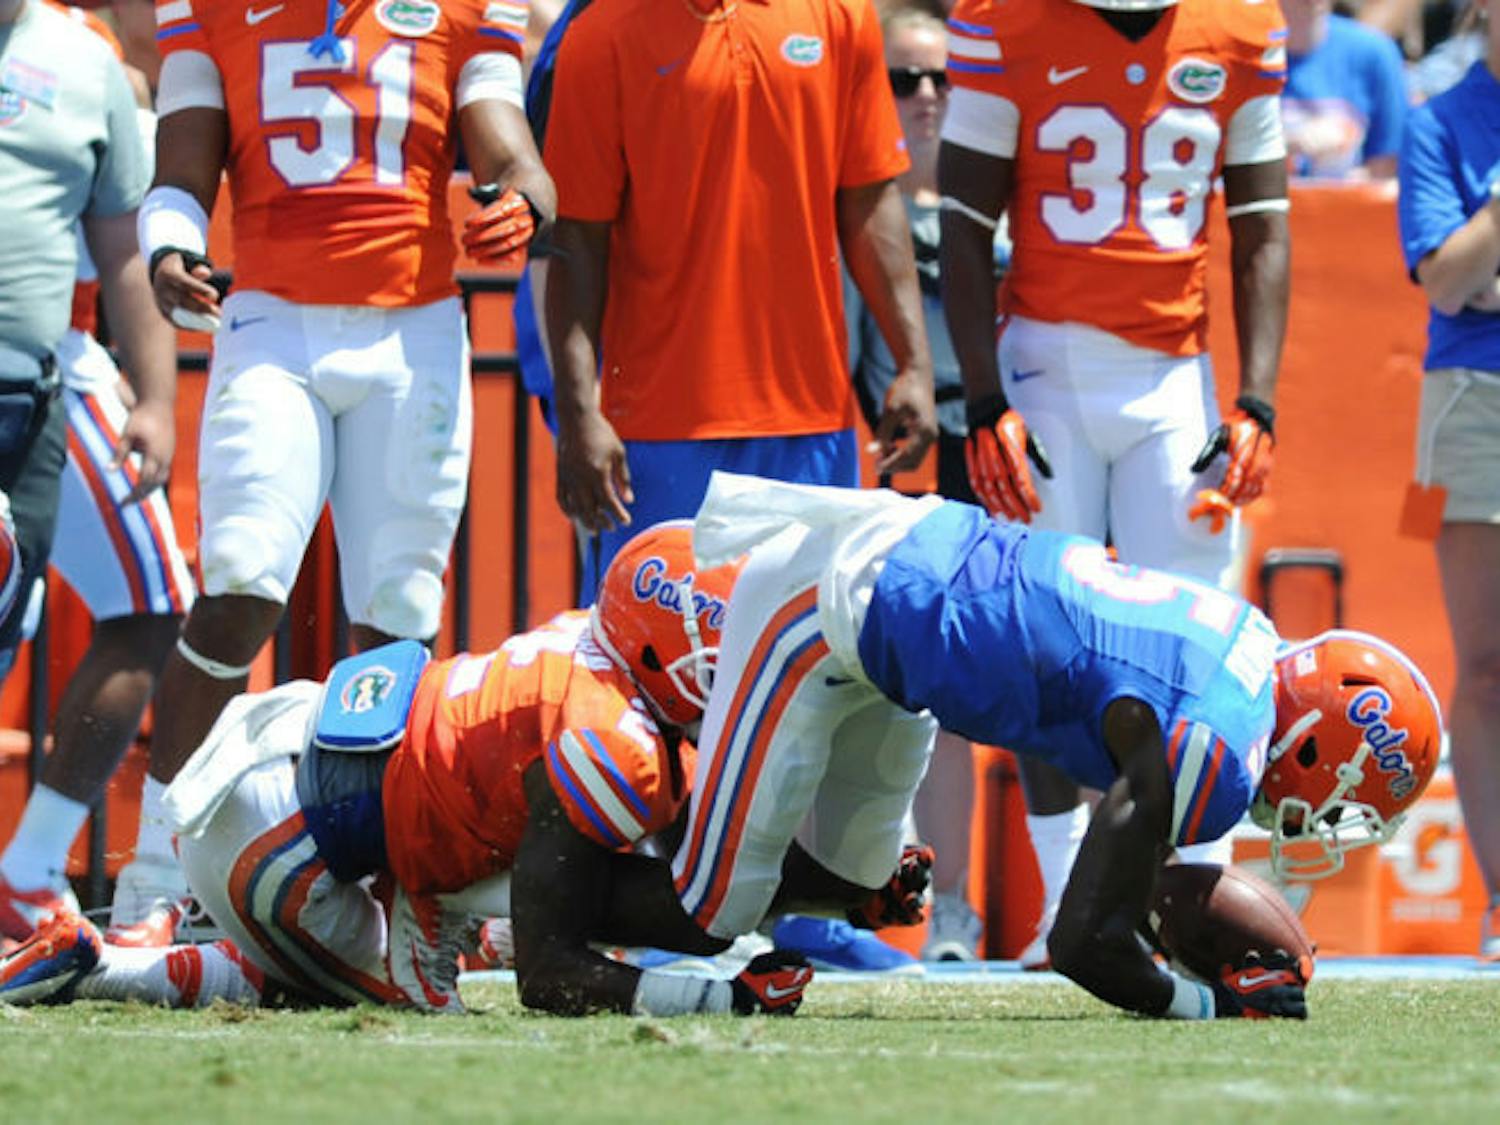 Ahmad Fulwood (5) recovers from a tackle made by Jabari Gorman (2) during Florida’s Orange and Blue Debut on Saturday in Ben Hill Griffin Stadium. Fulwood is one of several sophomore wide receivers who expect to have a large role in the Gators’ offense in 2014.